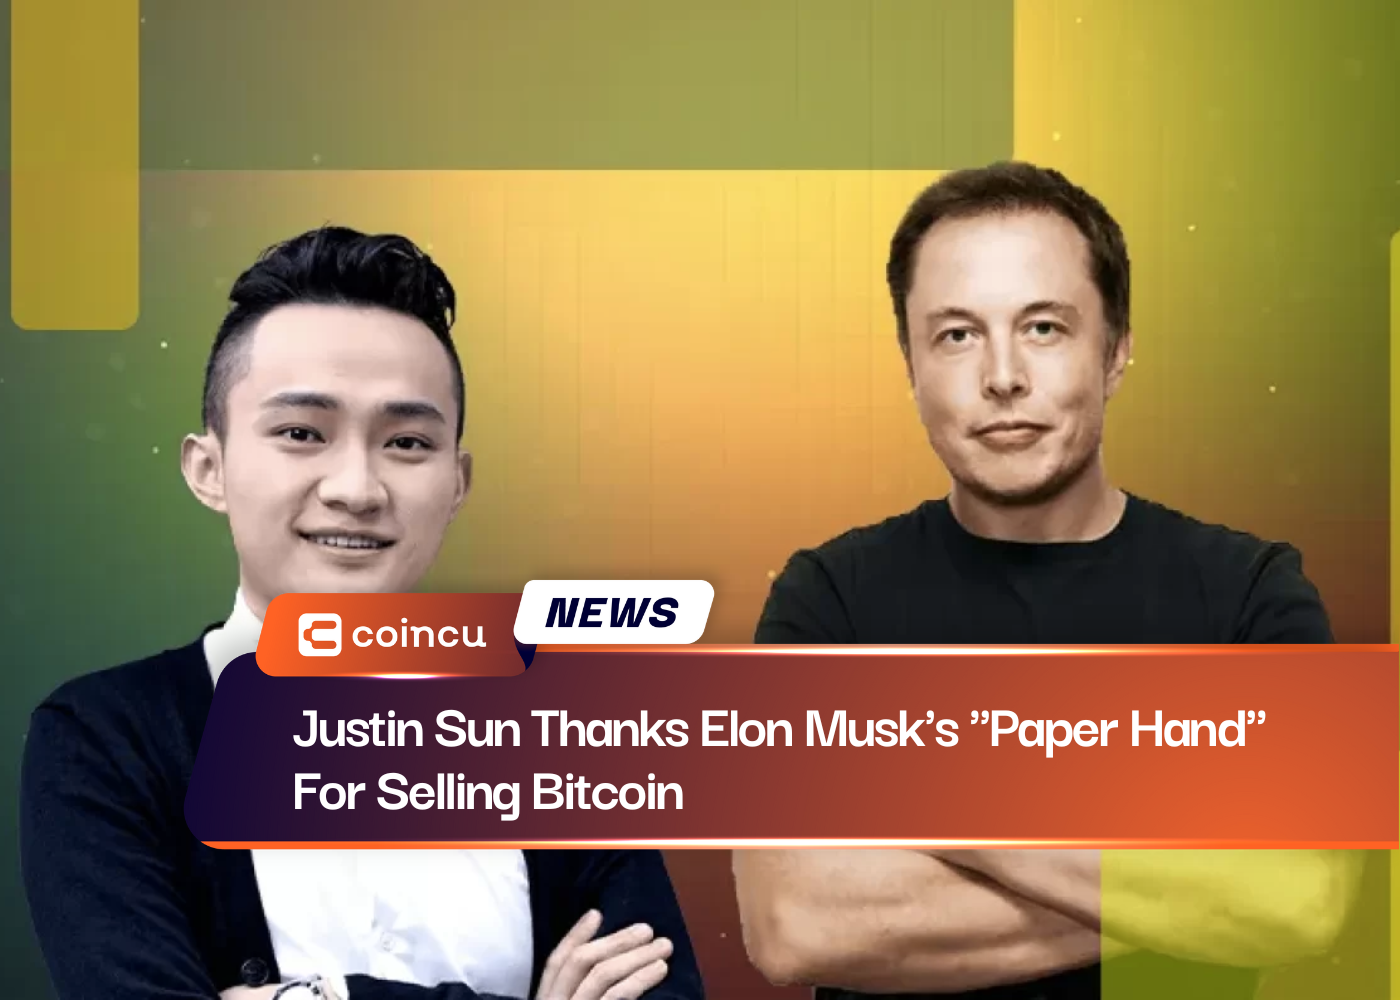 Justin Sun Thanks Elon Musk's "Paper Hand" For Selling Bitcoin